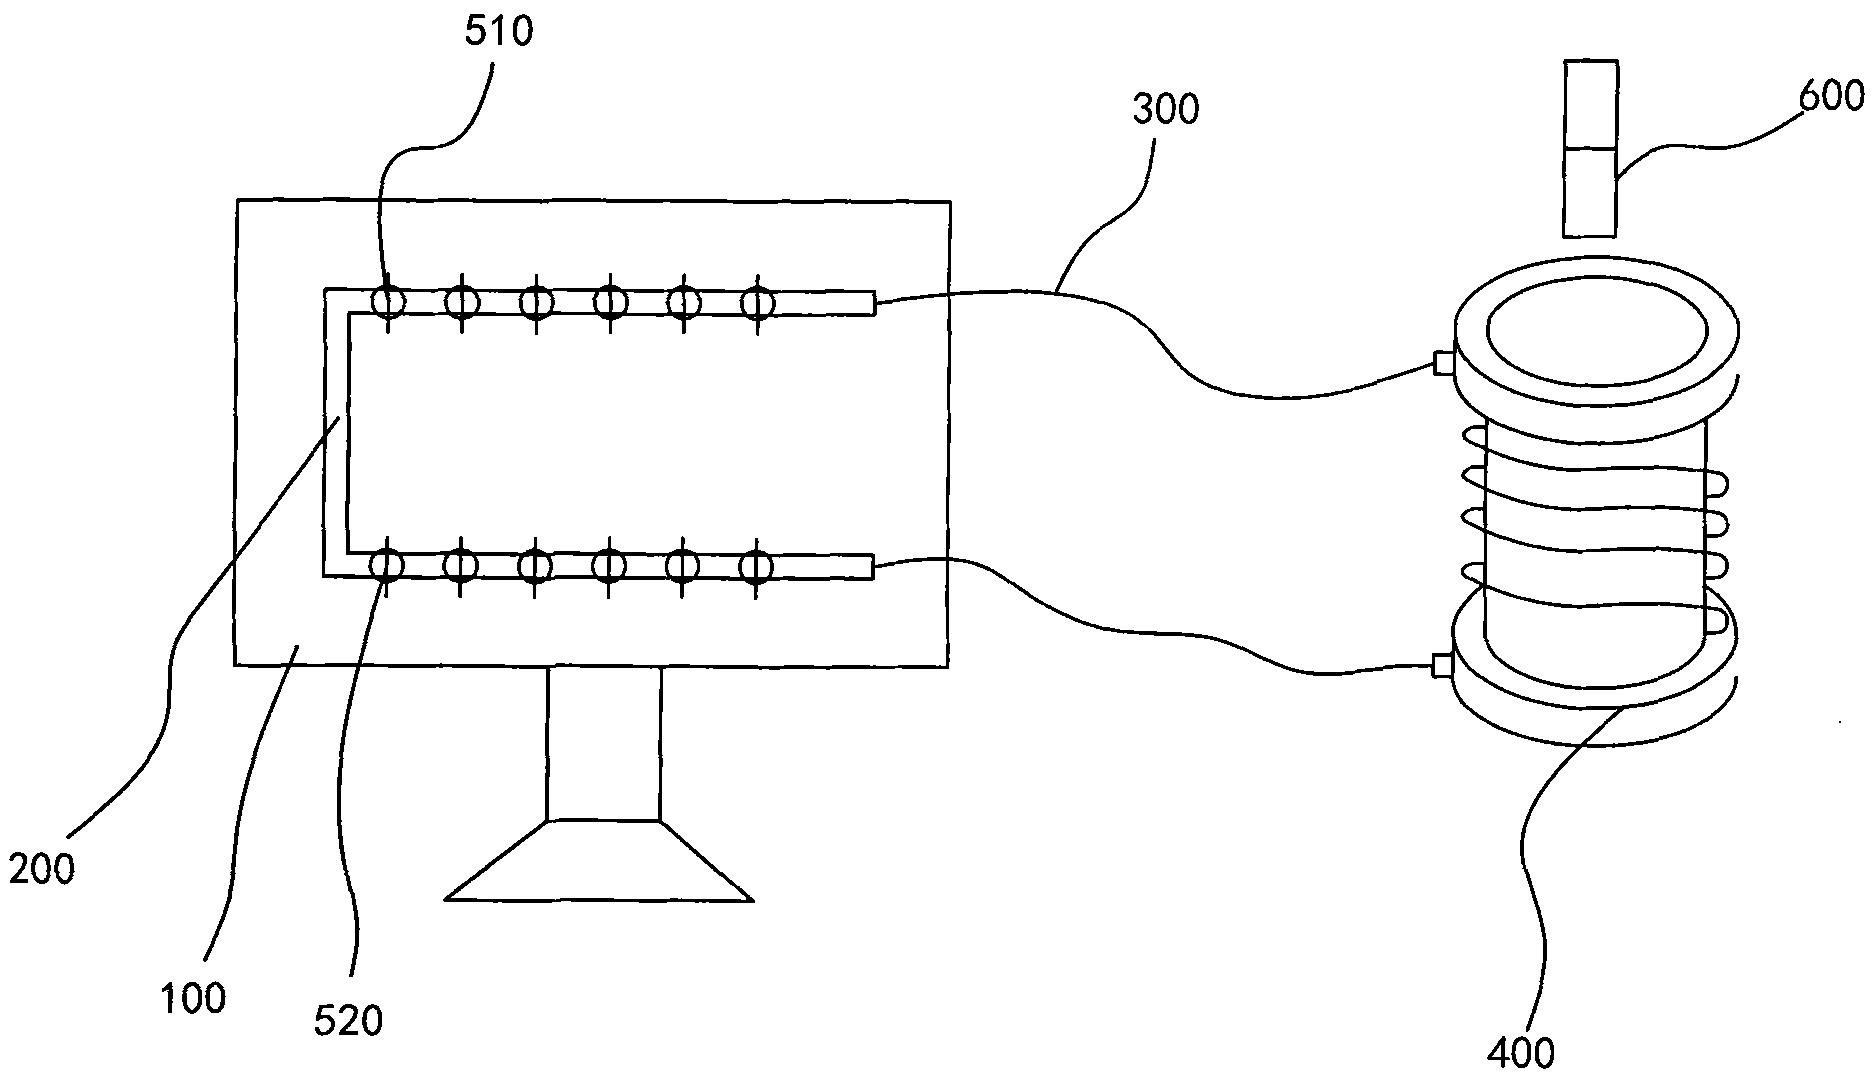 Device for demonstrating electromagnetic induction phenomena with light emitting diodes